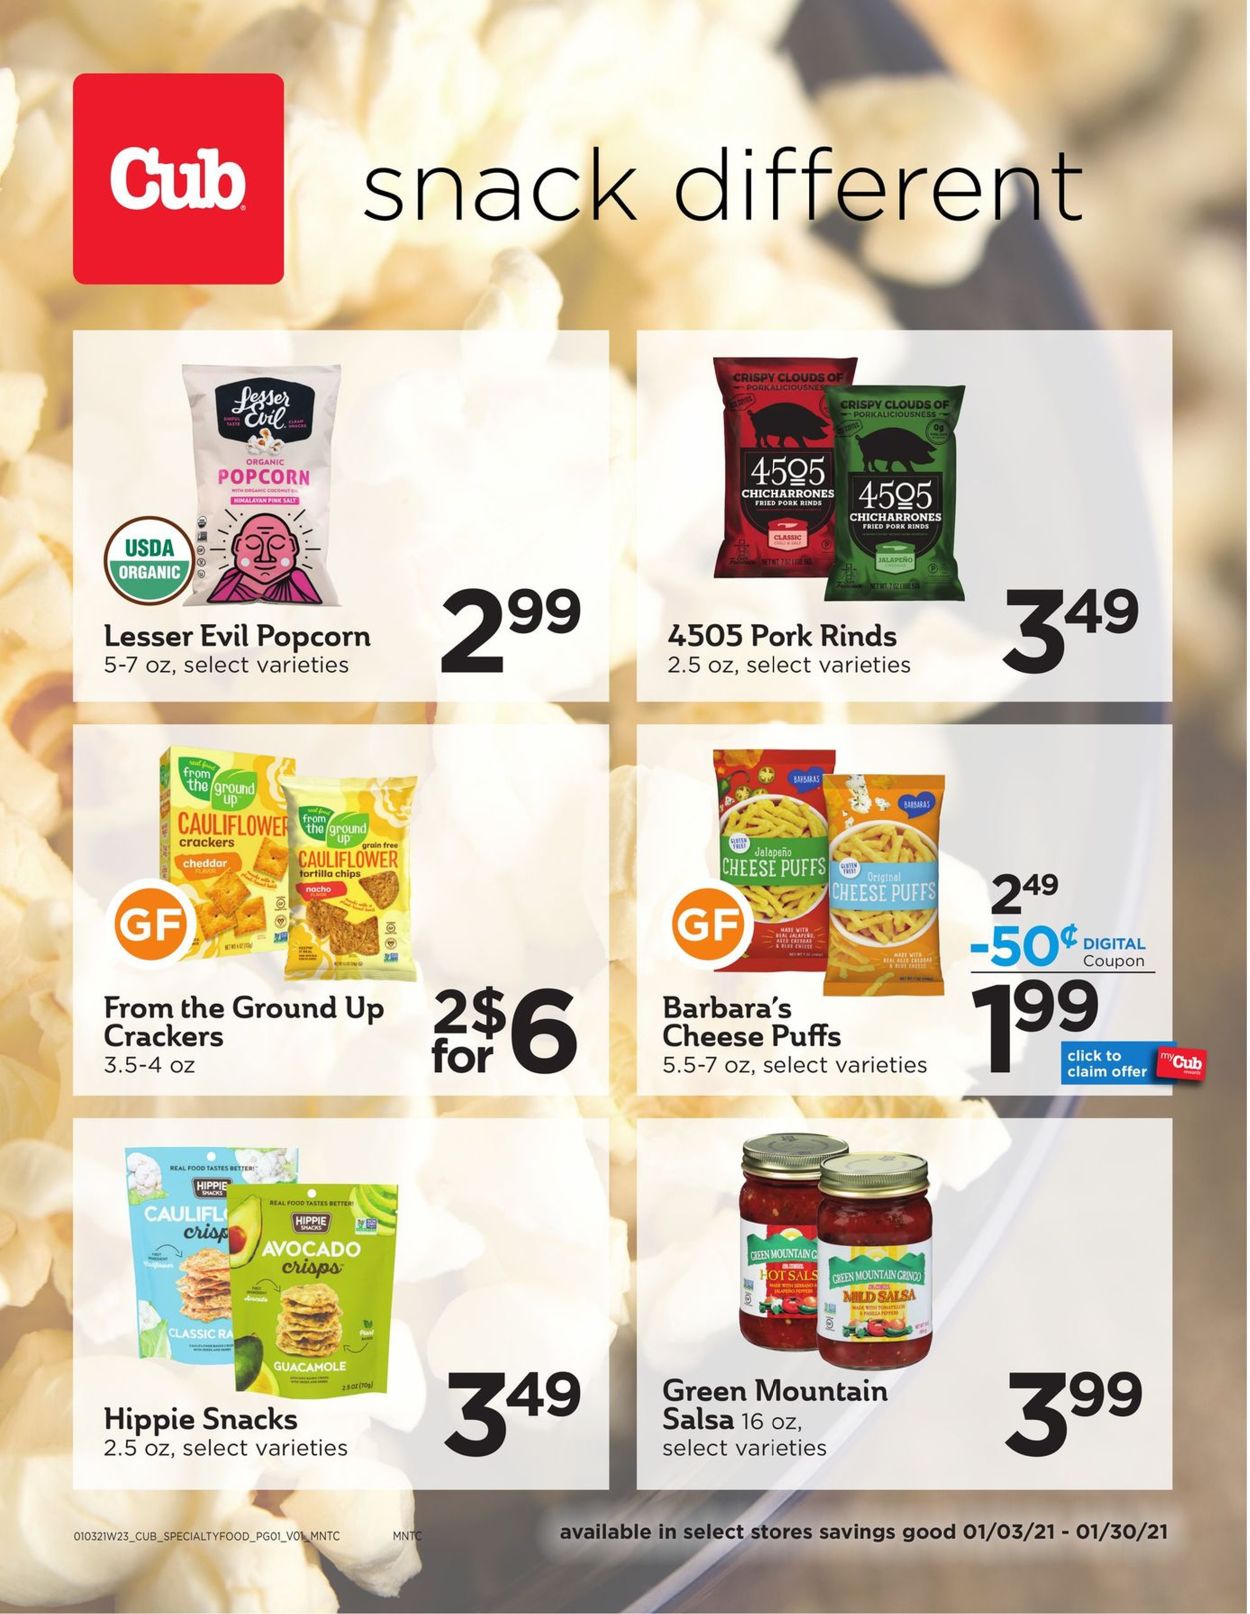 Cub Foods Snack Different 2021 Weekly Ad Circular - valid 01/03-01/30/2021